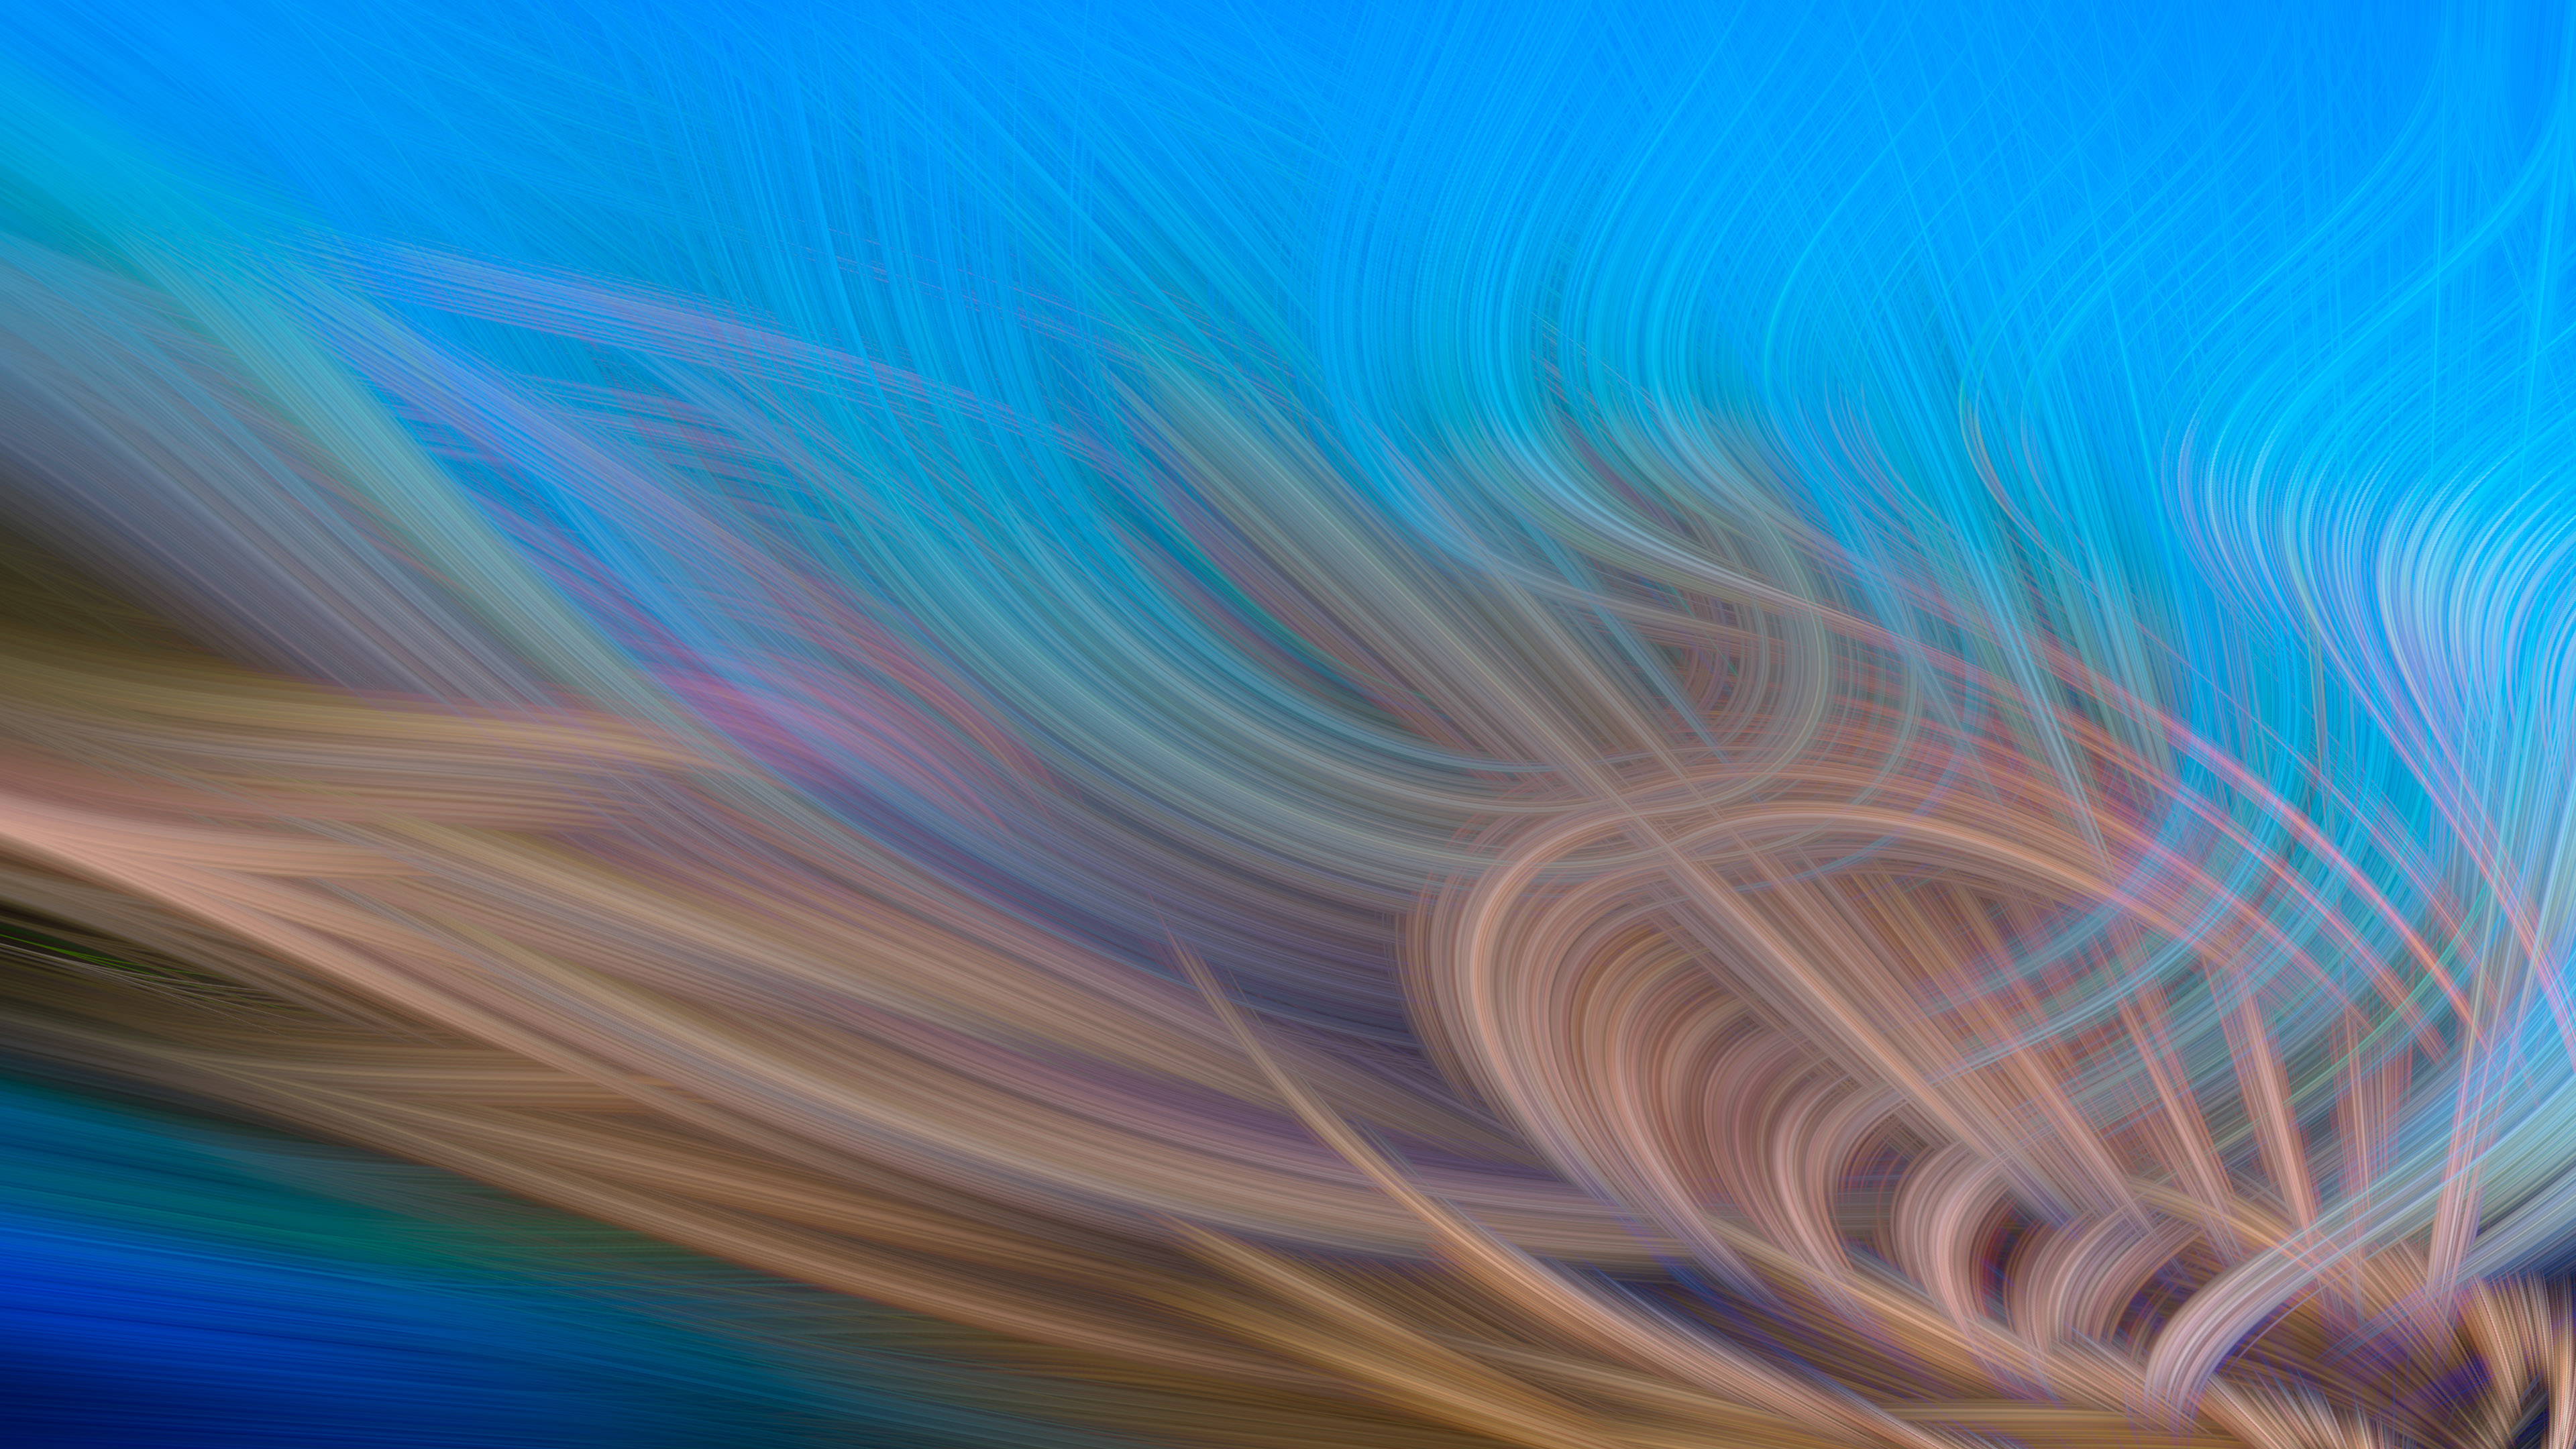 computer abstract art wallpaper to free download in 4K Ultra HD resolution